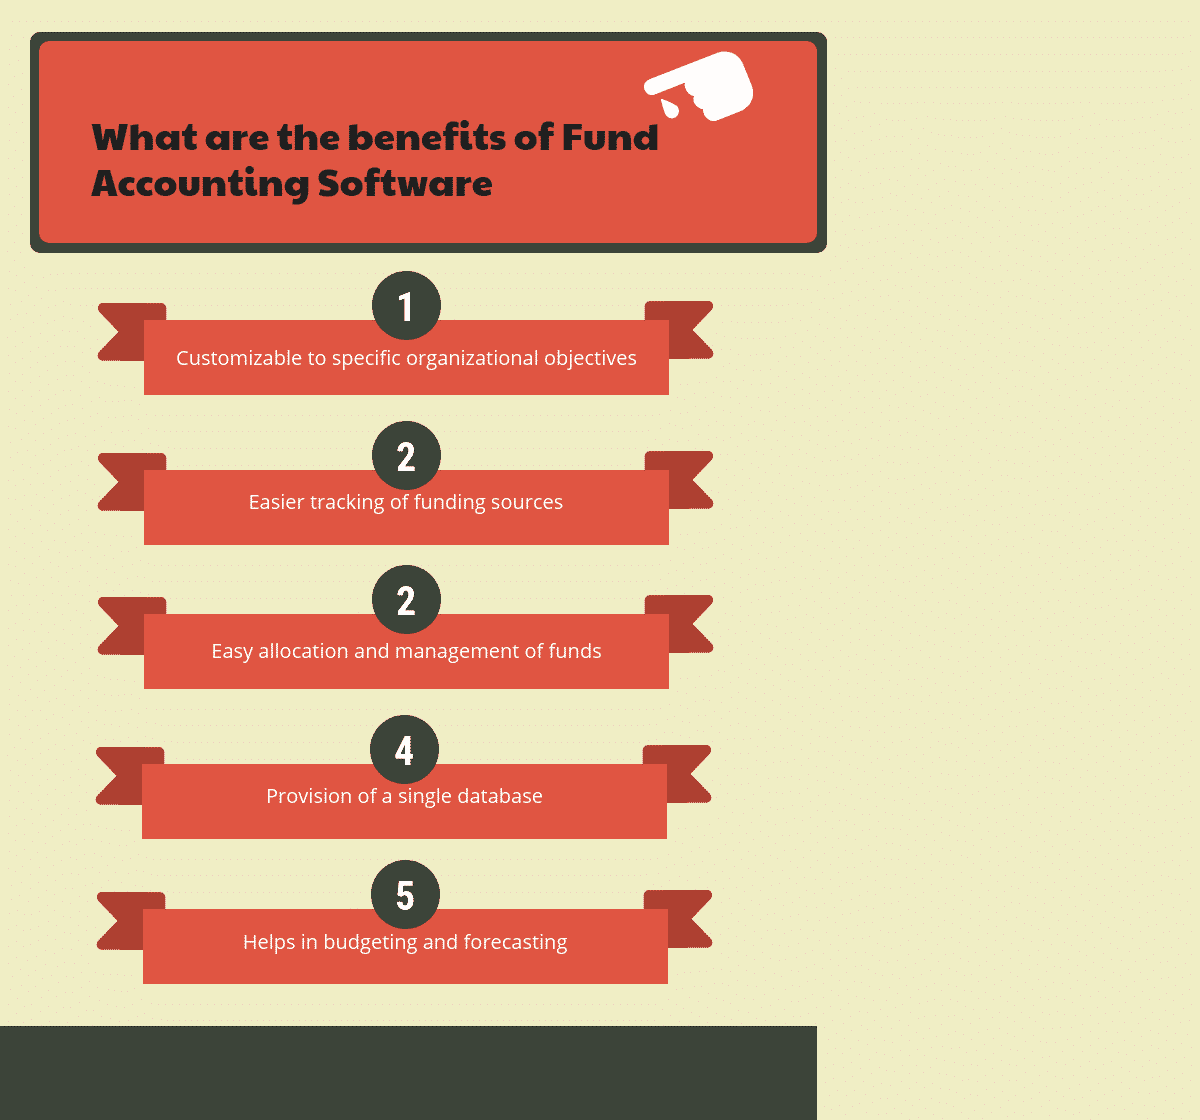 What are the benefits of Fund Accounting Software?